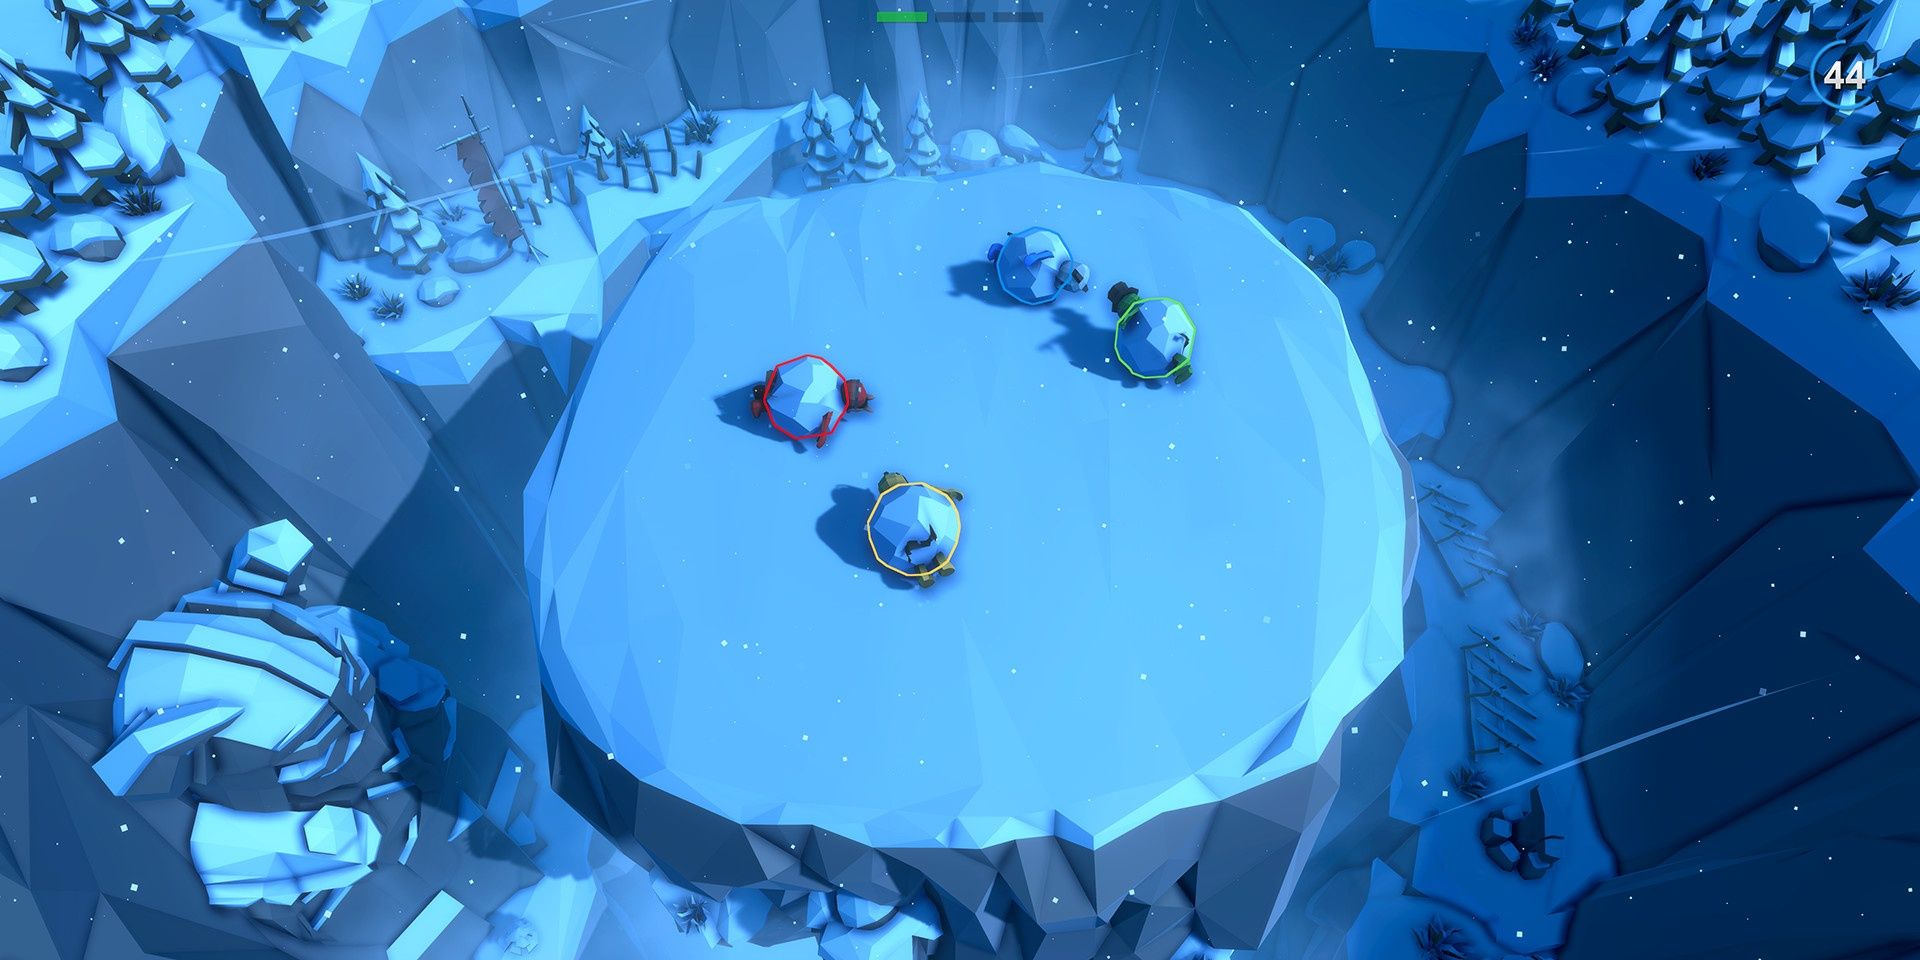 Four players portrayed as snowballs on a stage of ice in Pummel Party